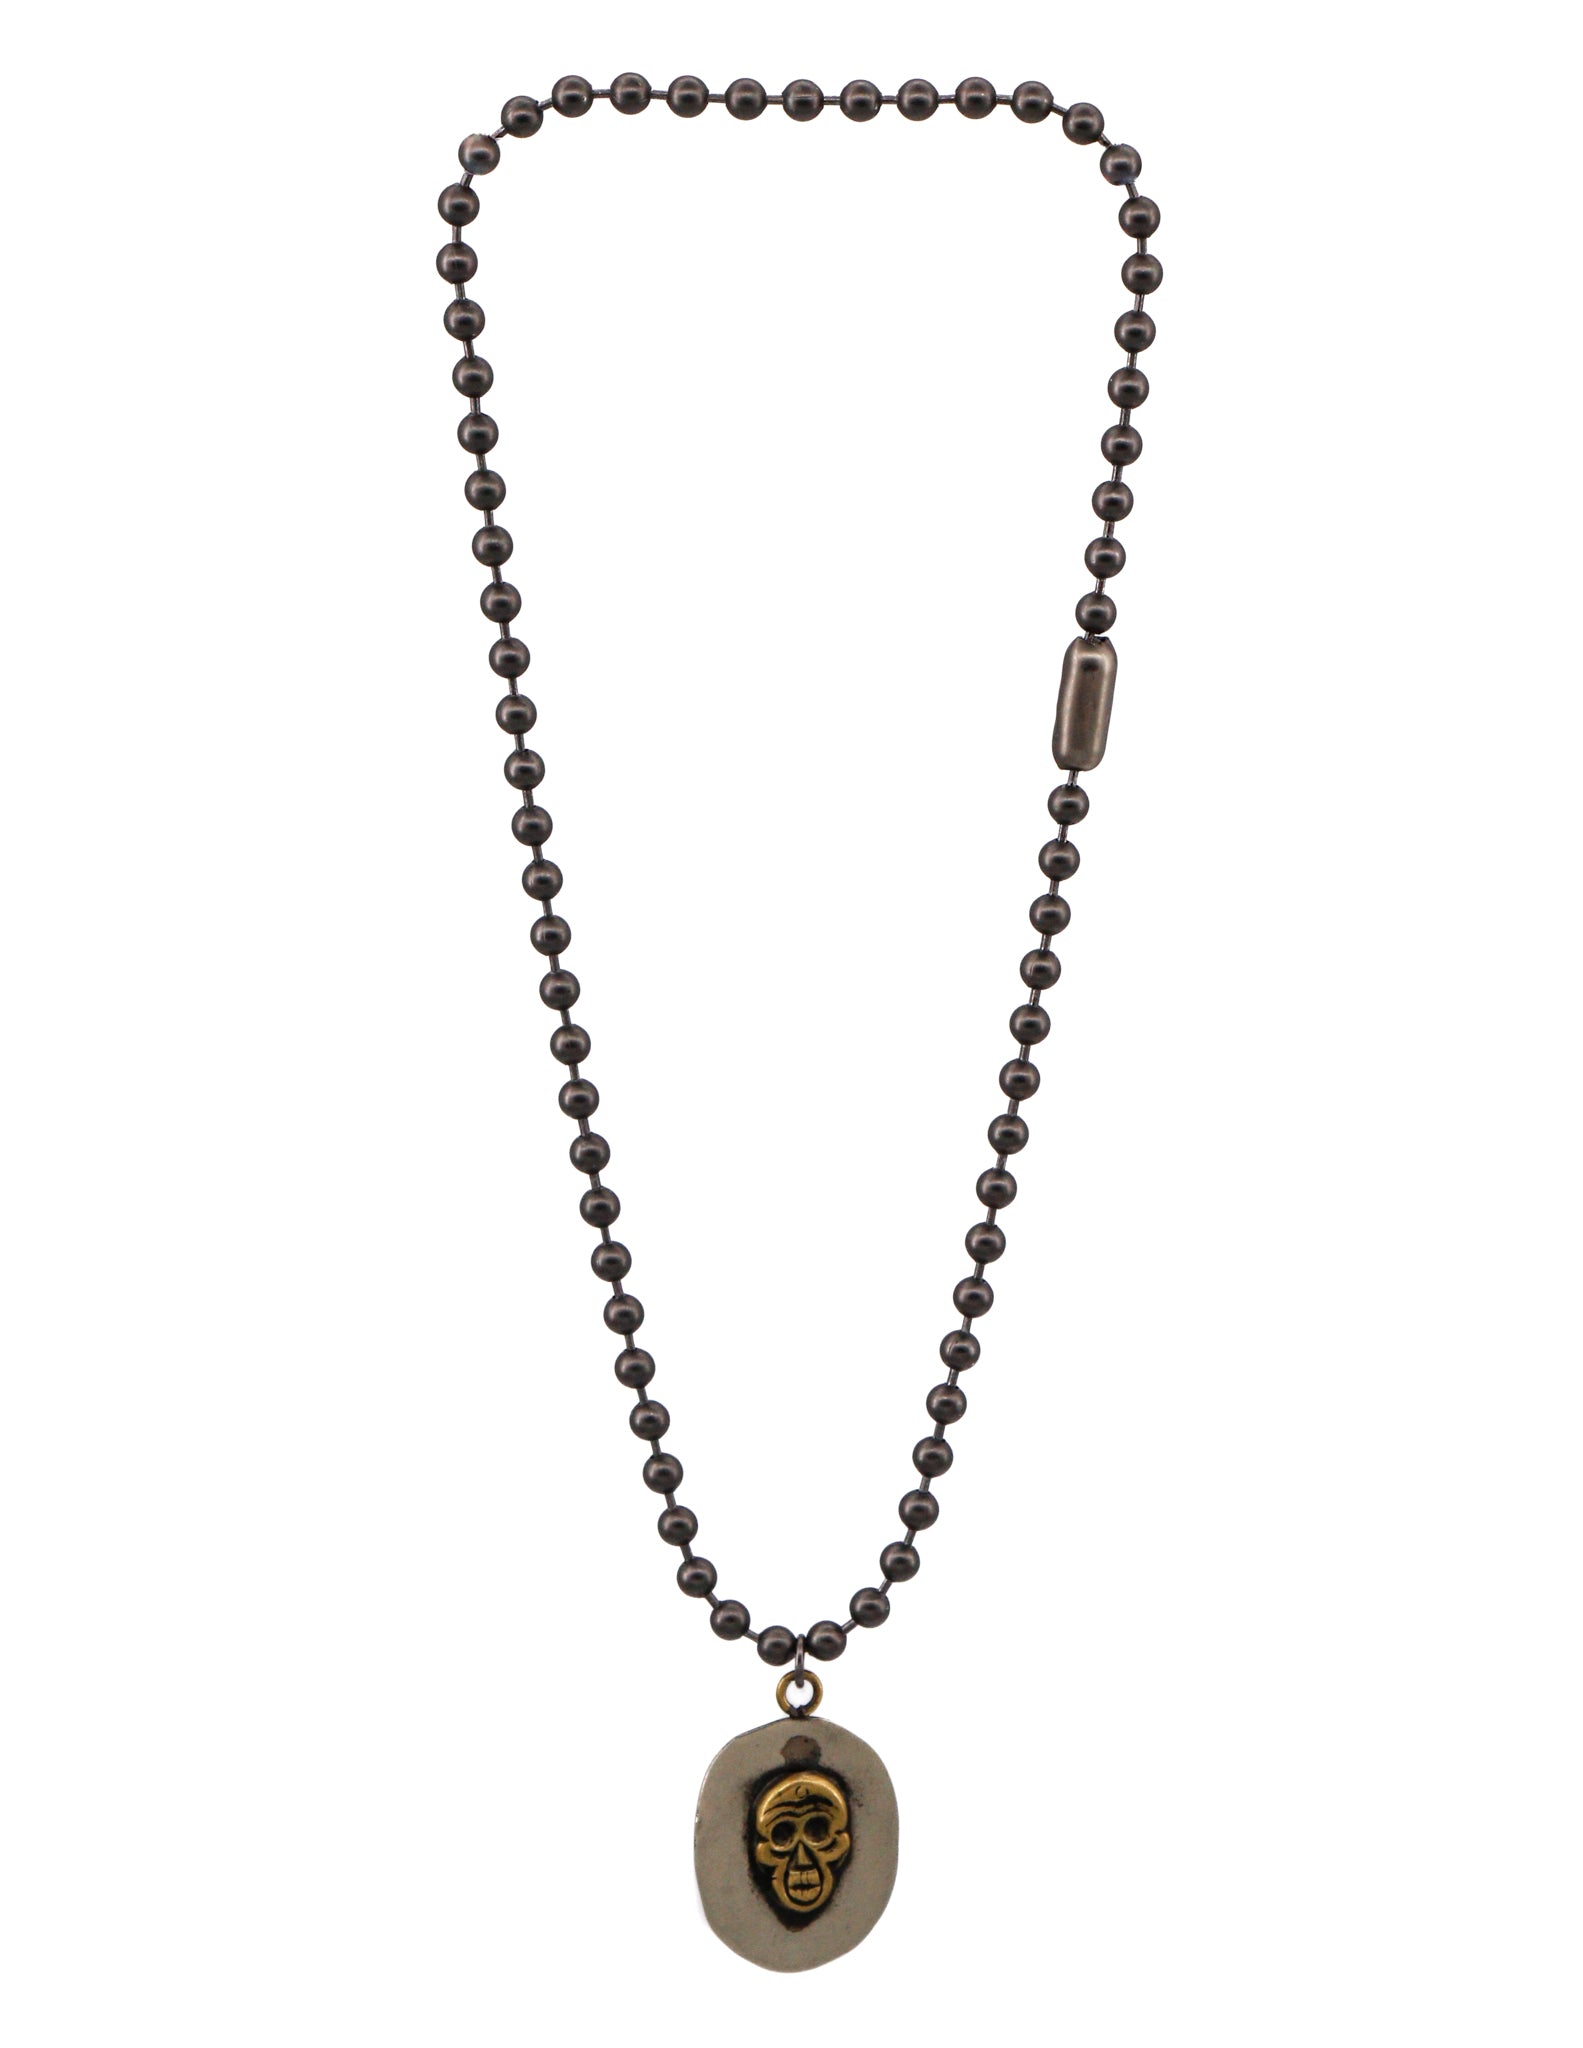 Brass ball chain necklace with a skull pendant